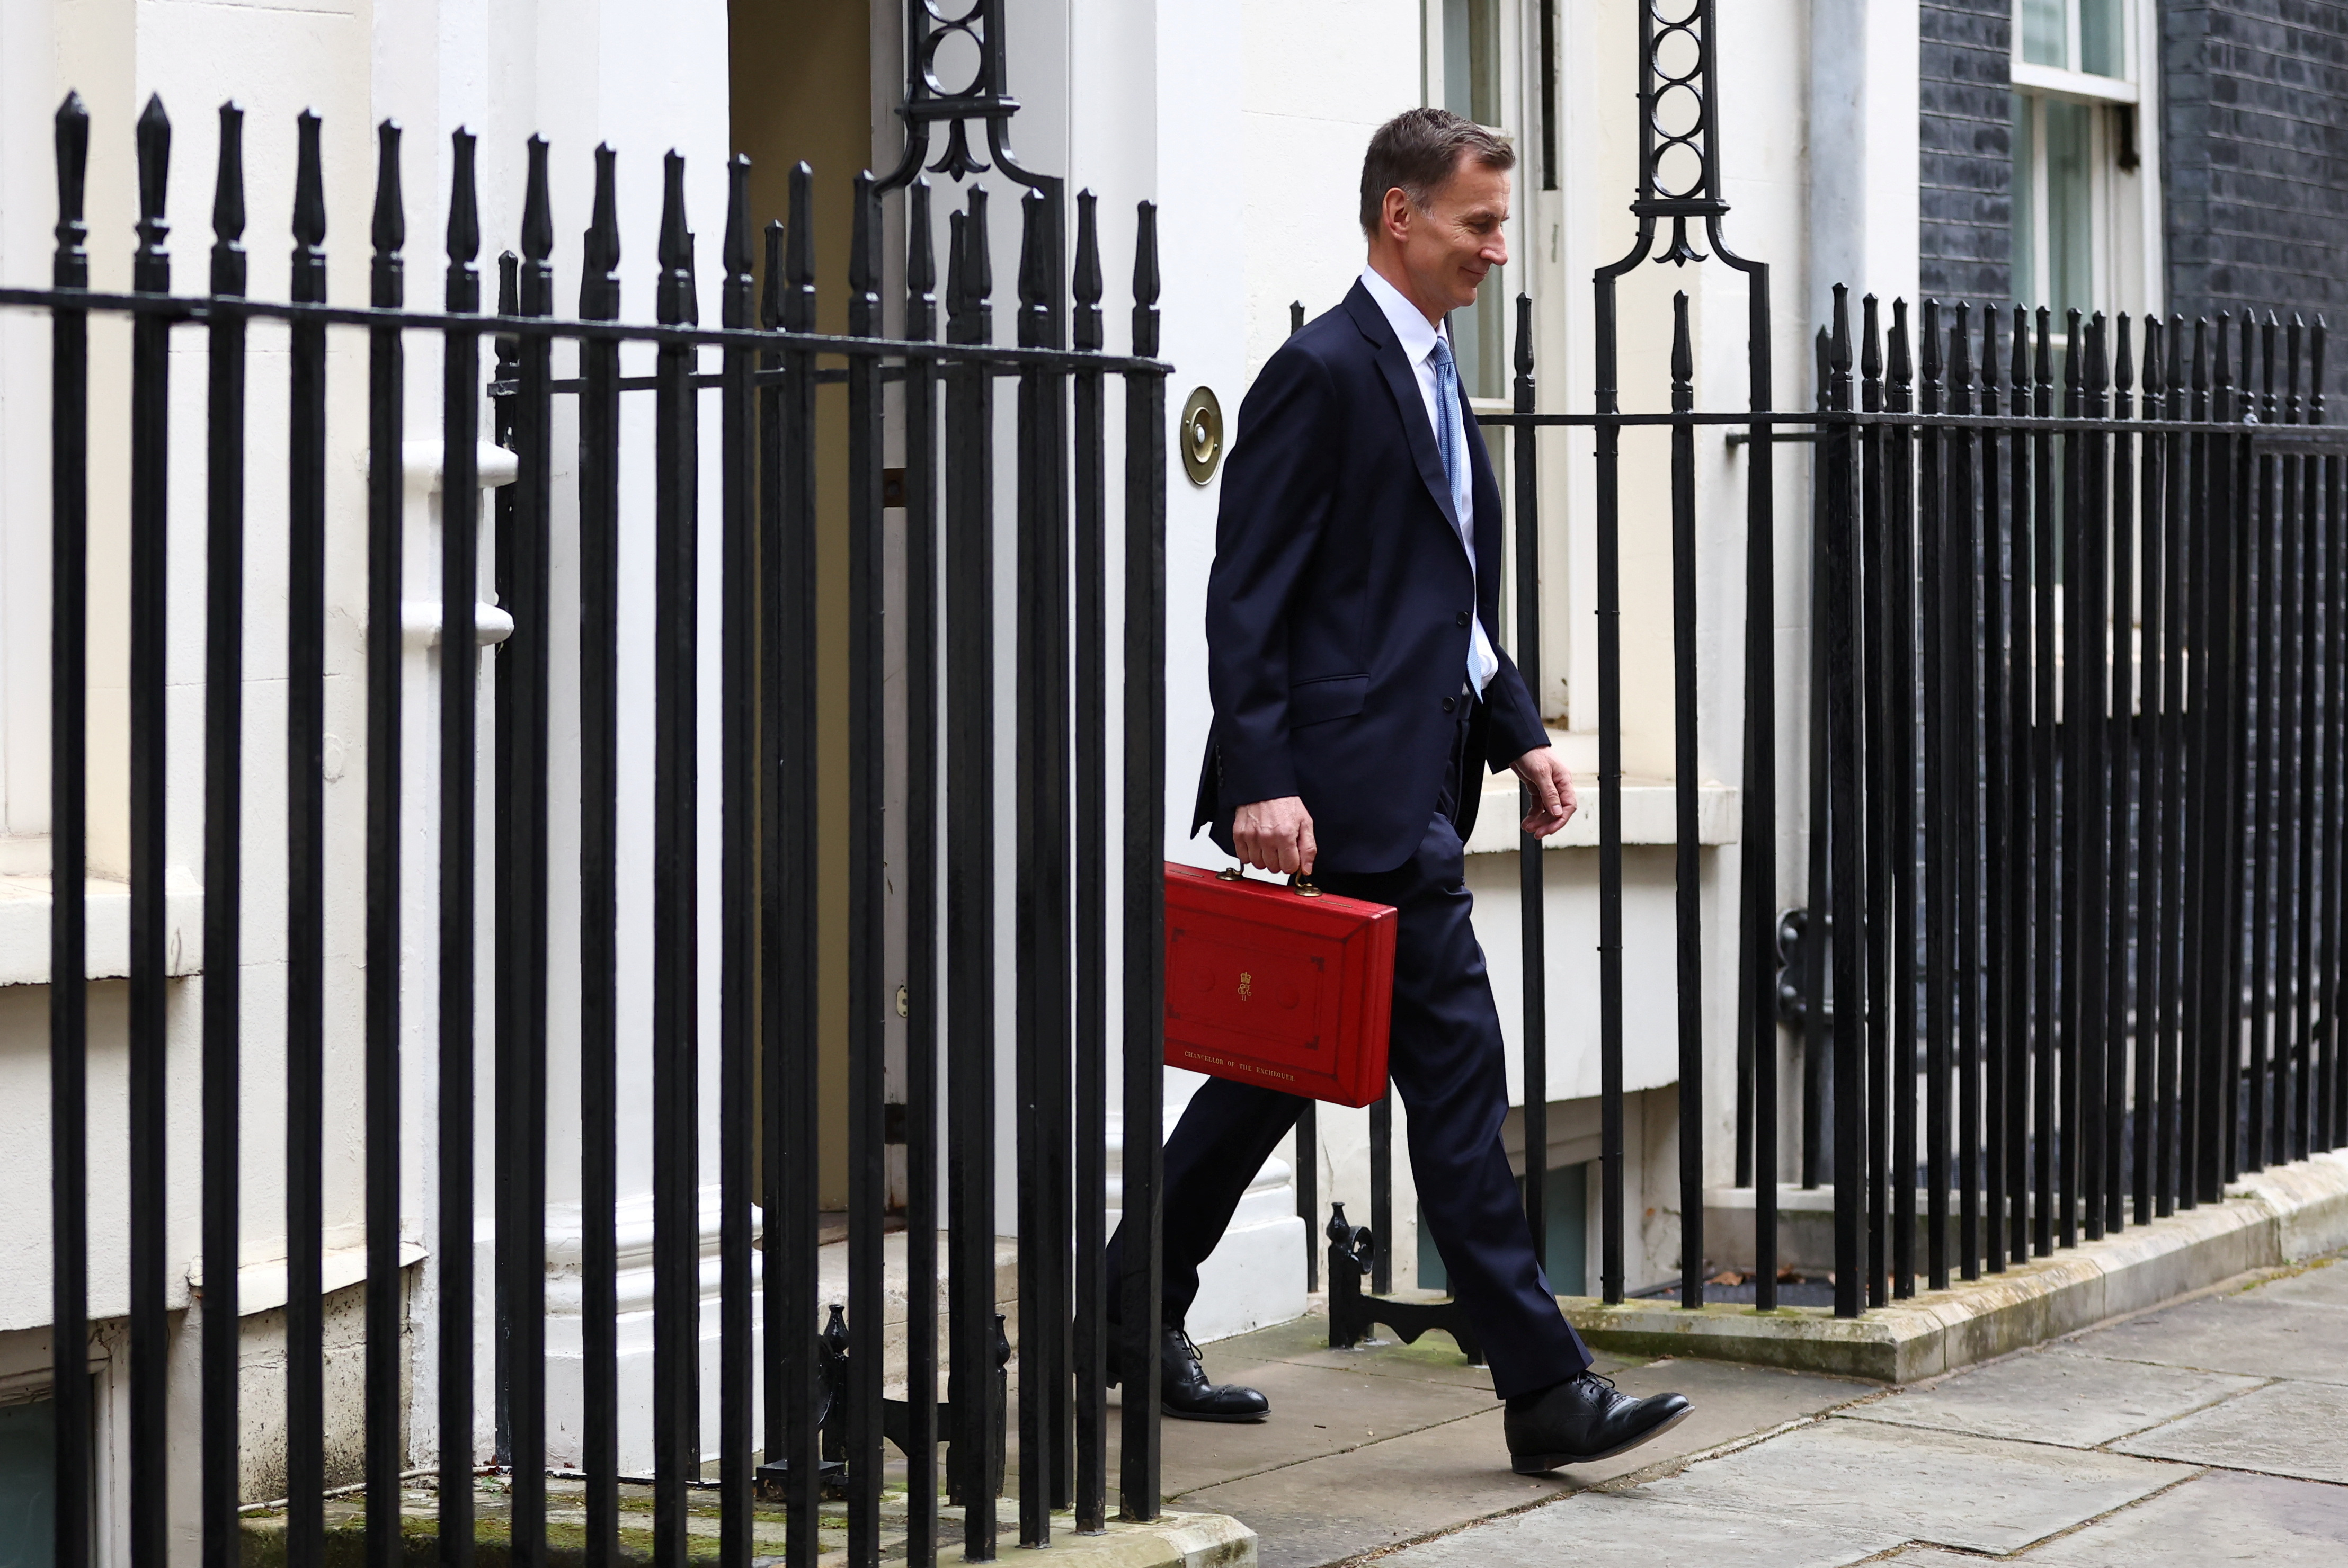 Chancellor of the Exchequer Hunt holds the budget box outside Downing Street in London